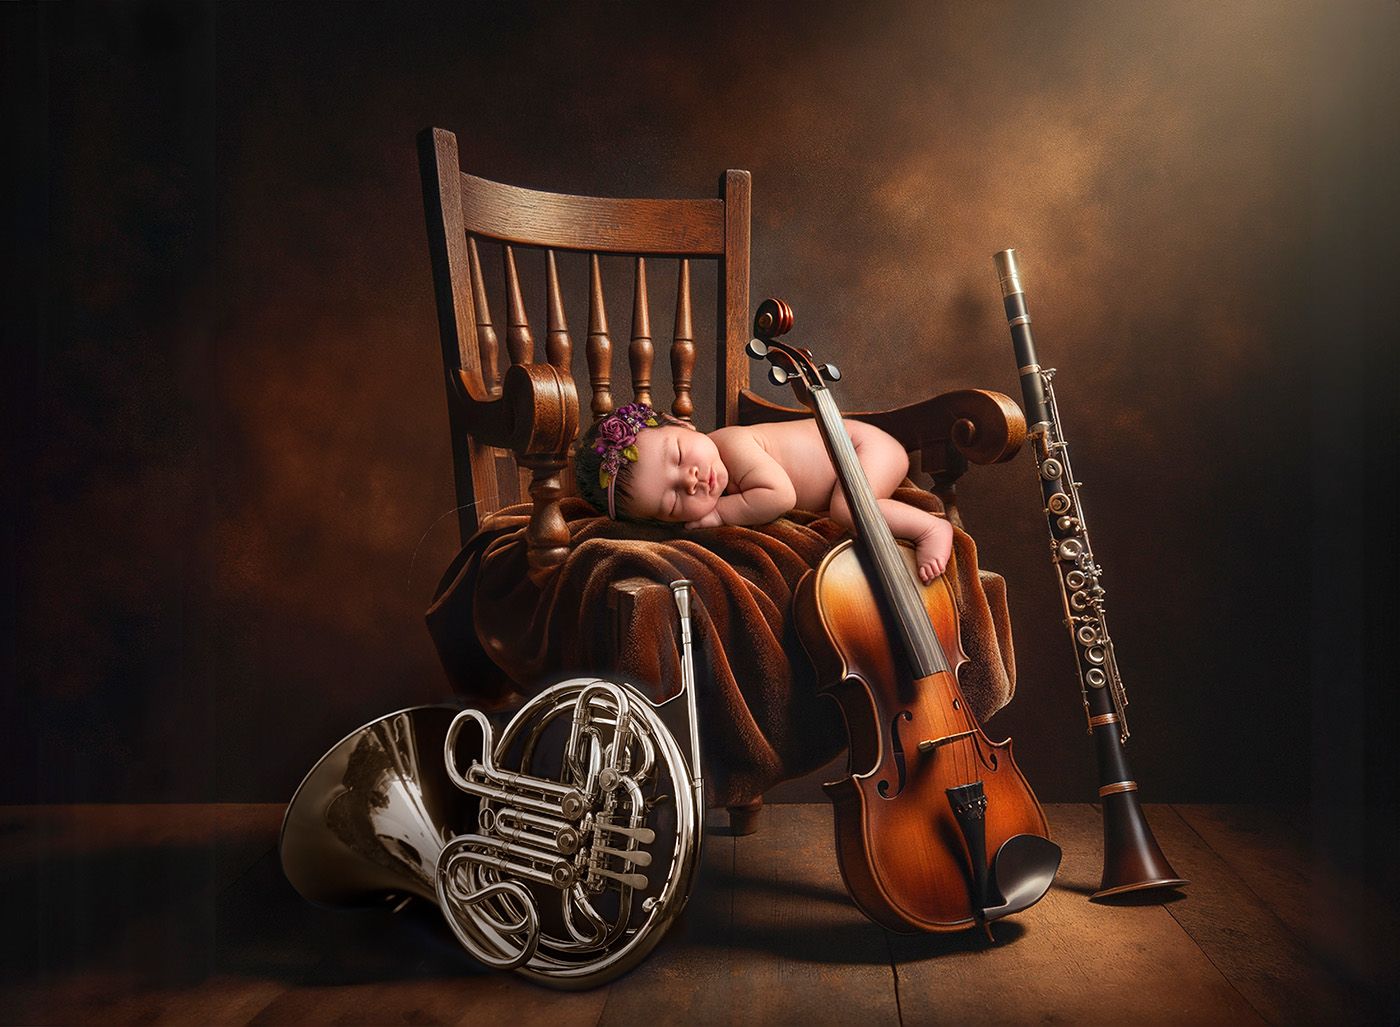 Luxury Newborn Photography newborn baby sleeping on a chair next to a violin, oboe and french horn